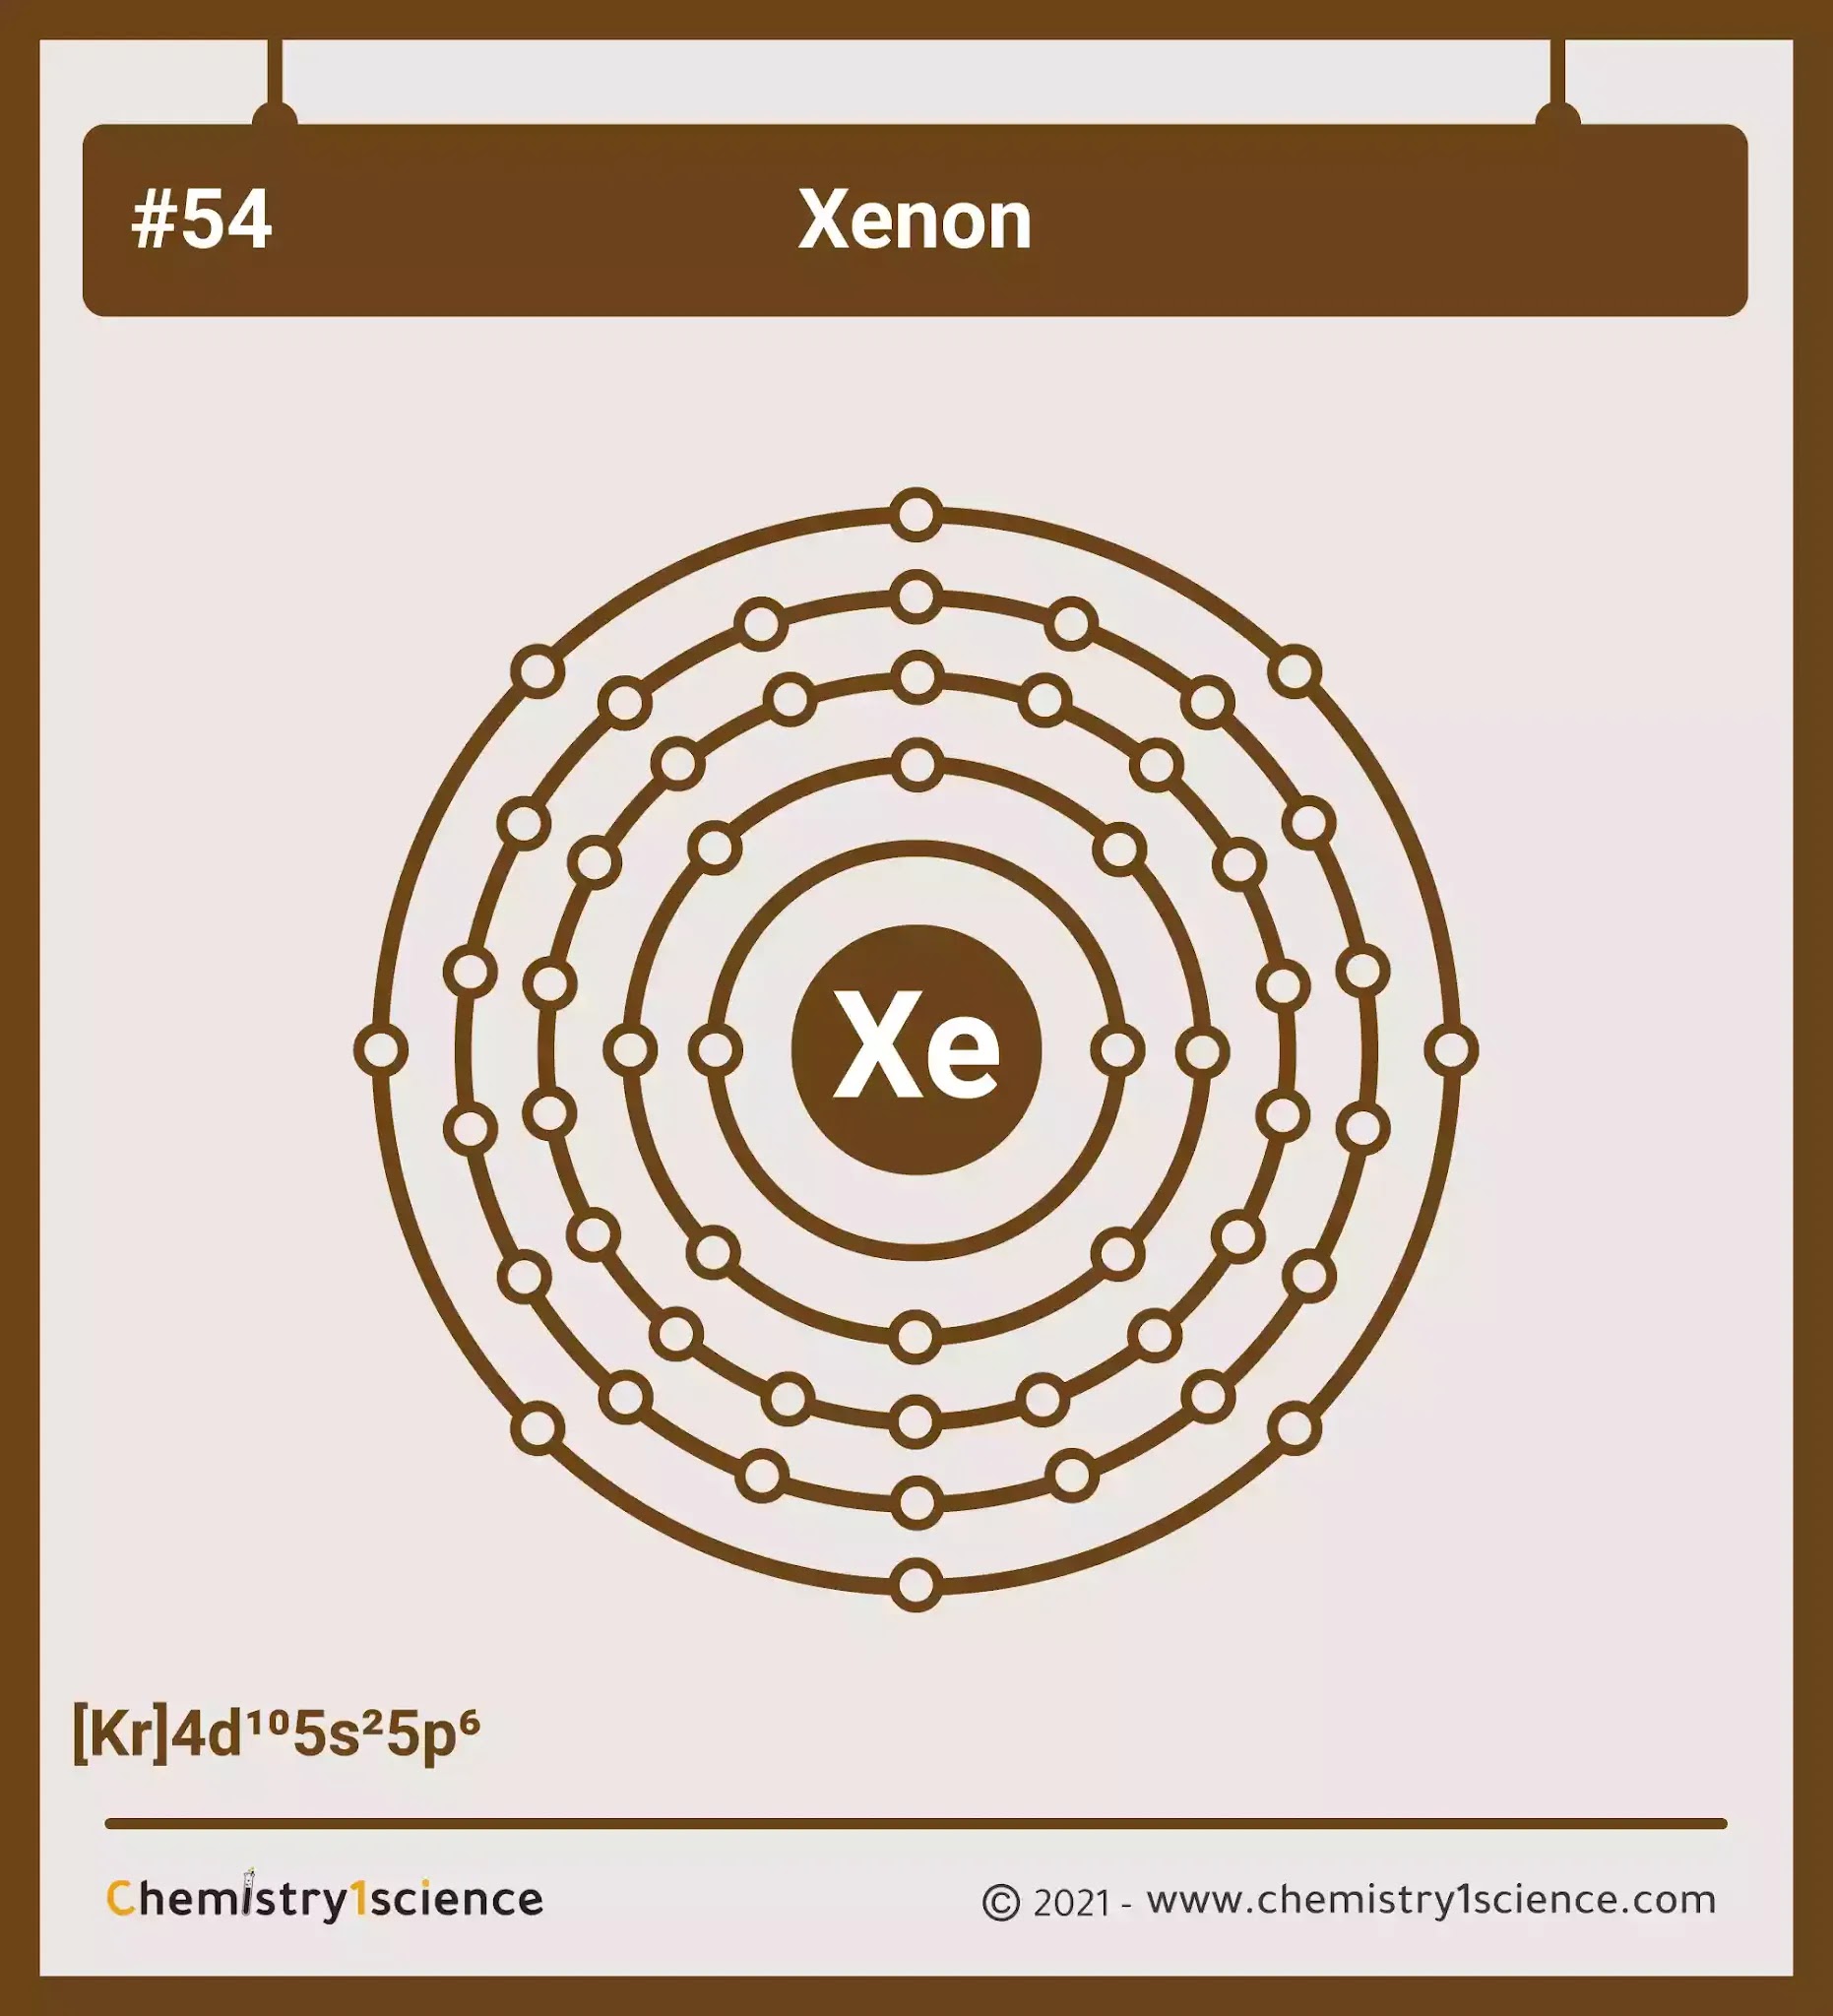 Xenon: Electron configuration - Symbol - Atomic Number - Atomic Mass - Oxidation States - Standard State - Group Block - Year Discovered – infographic